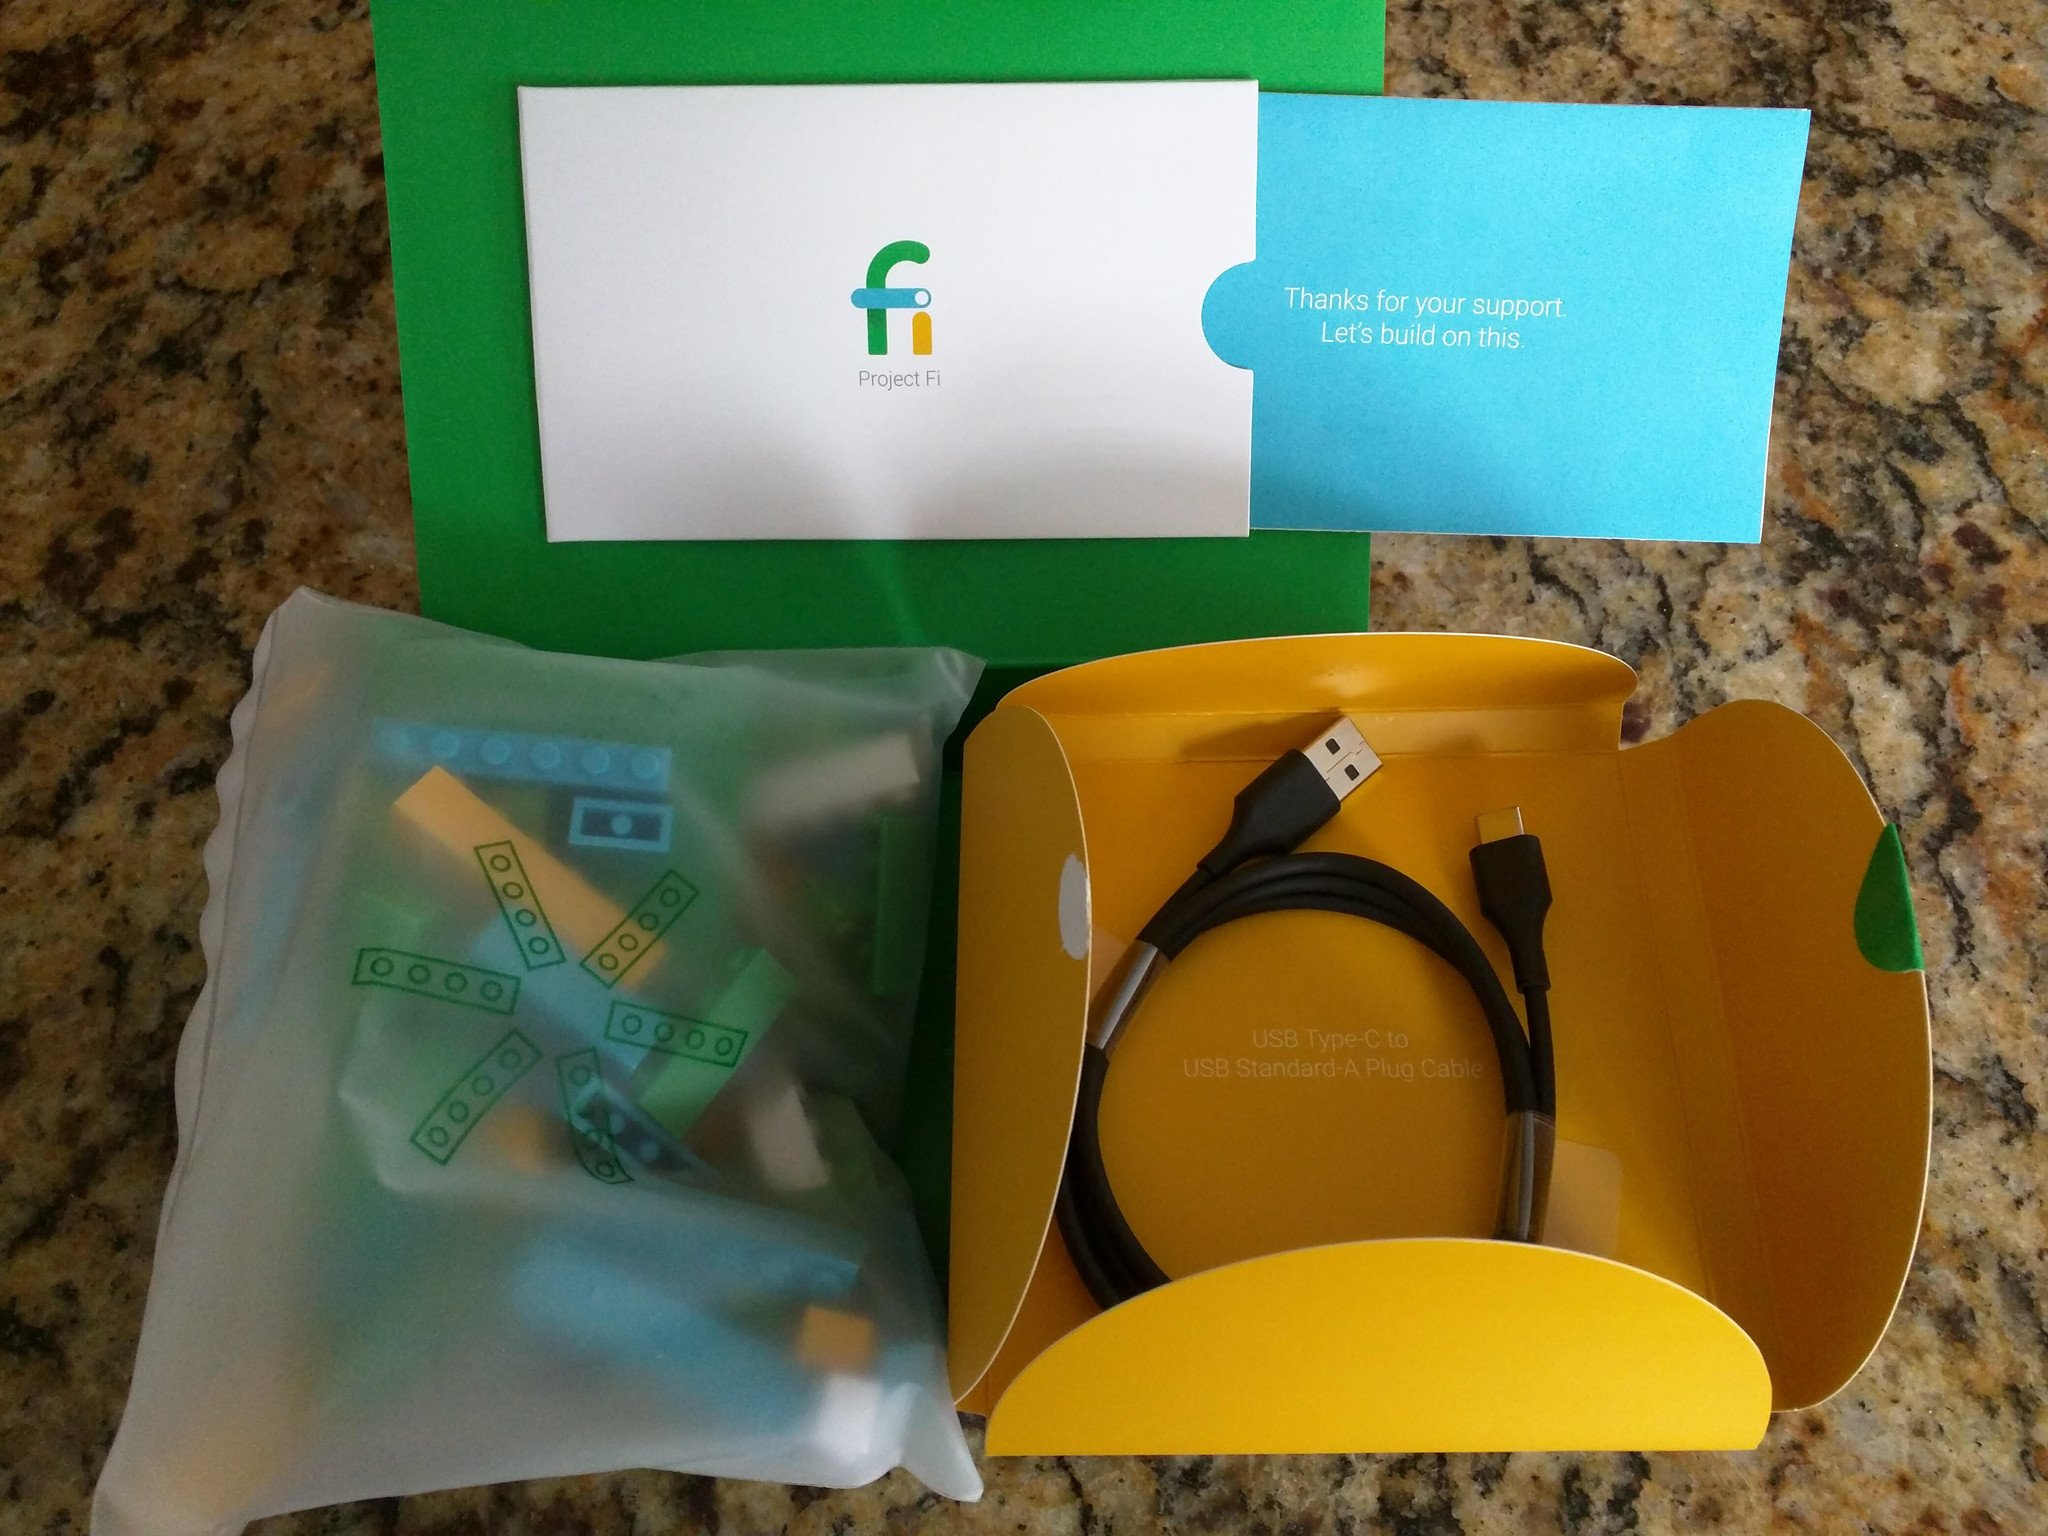 Project Fi is sending out a Lego kit and USB Type-C cable